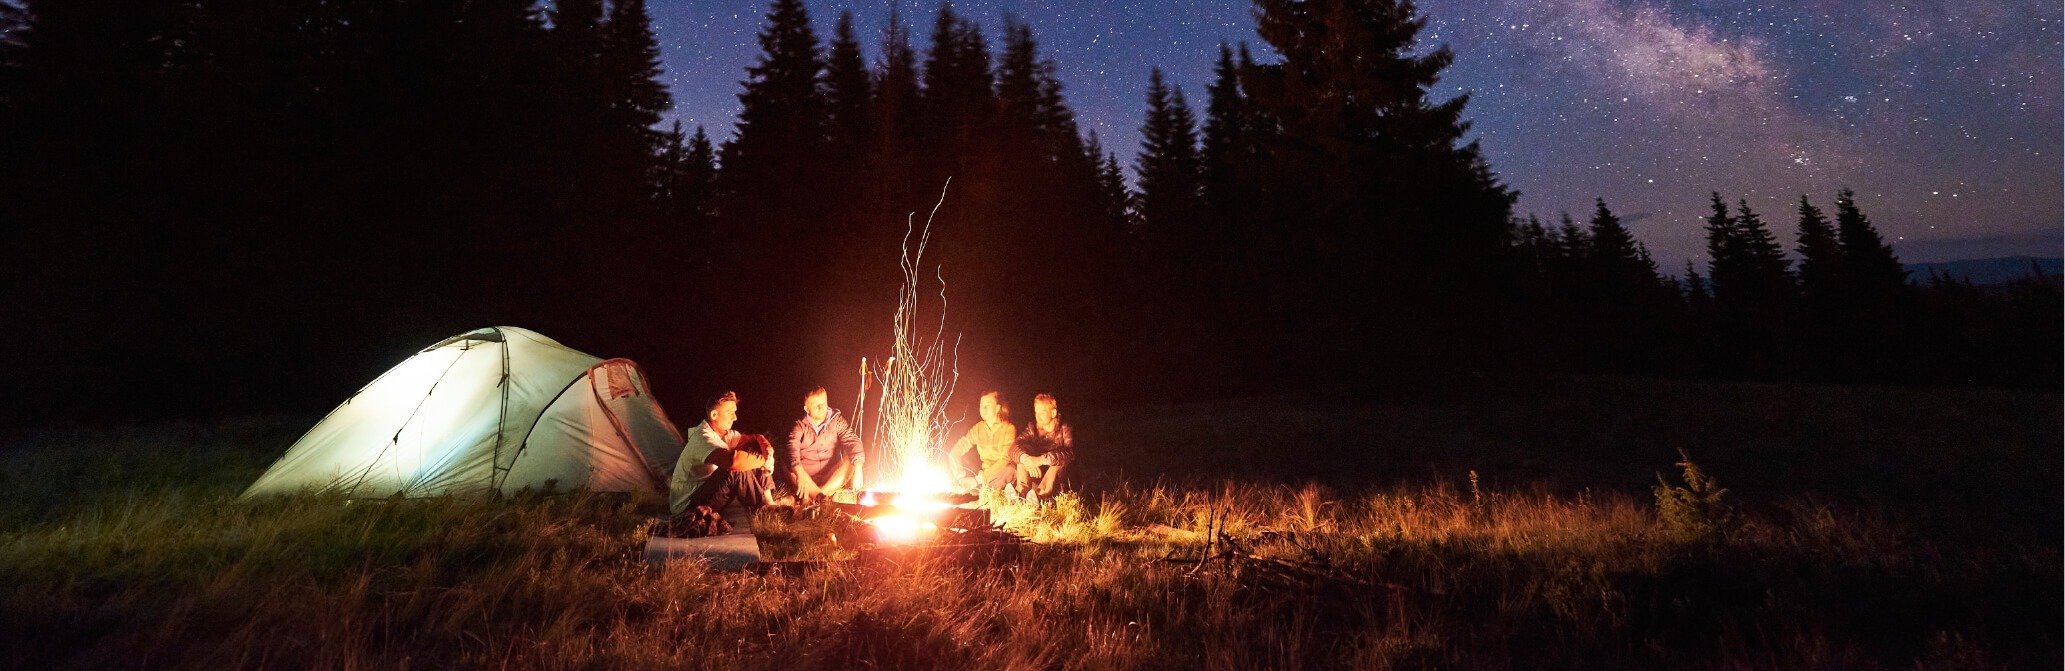 Friends camping in the forest against a starry night. Group is in front of a campfire next to a large tent.